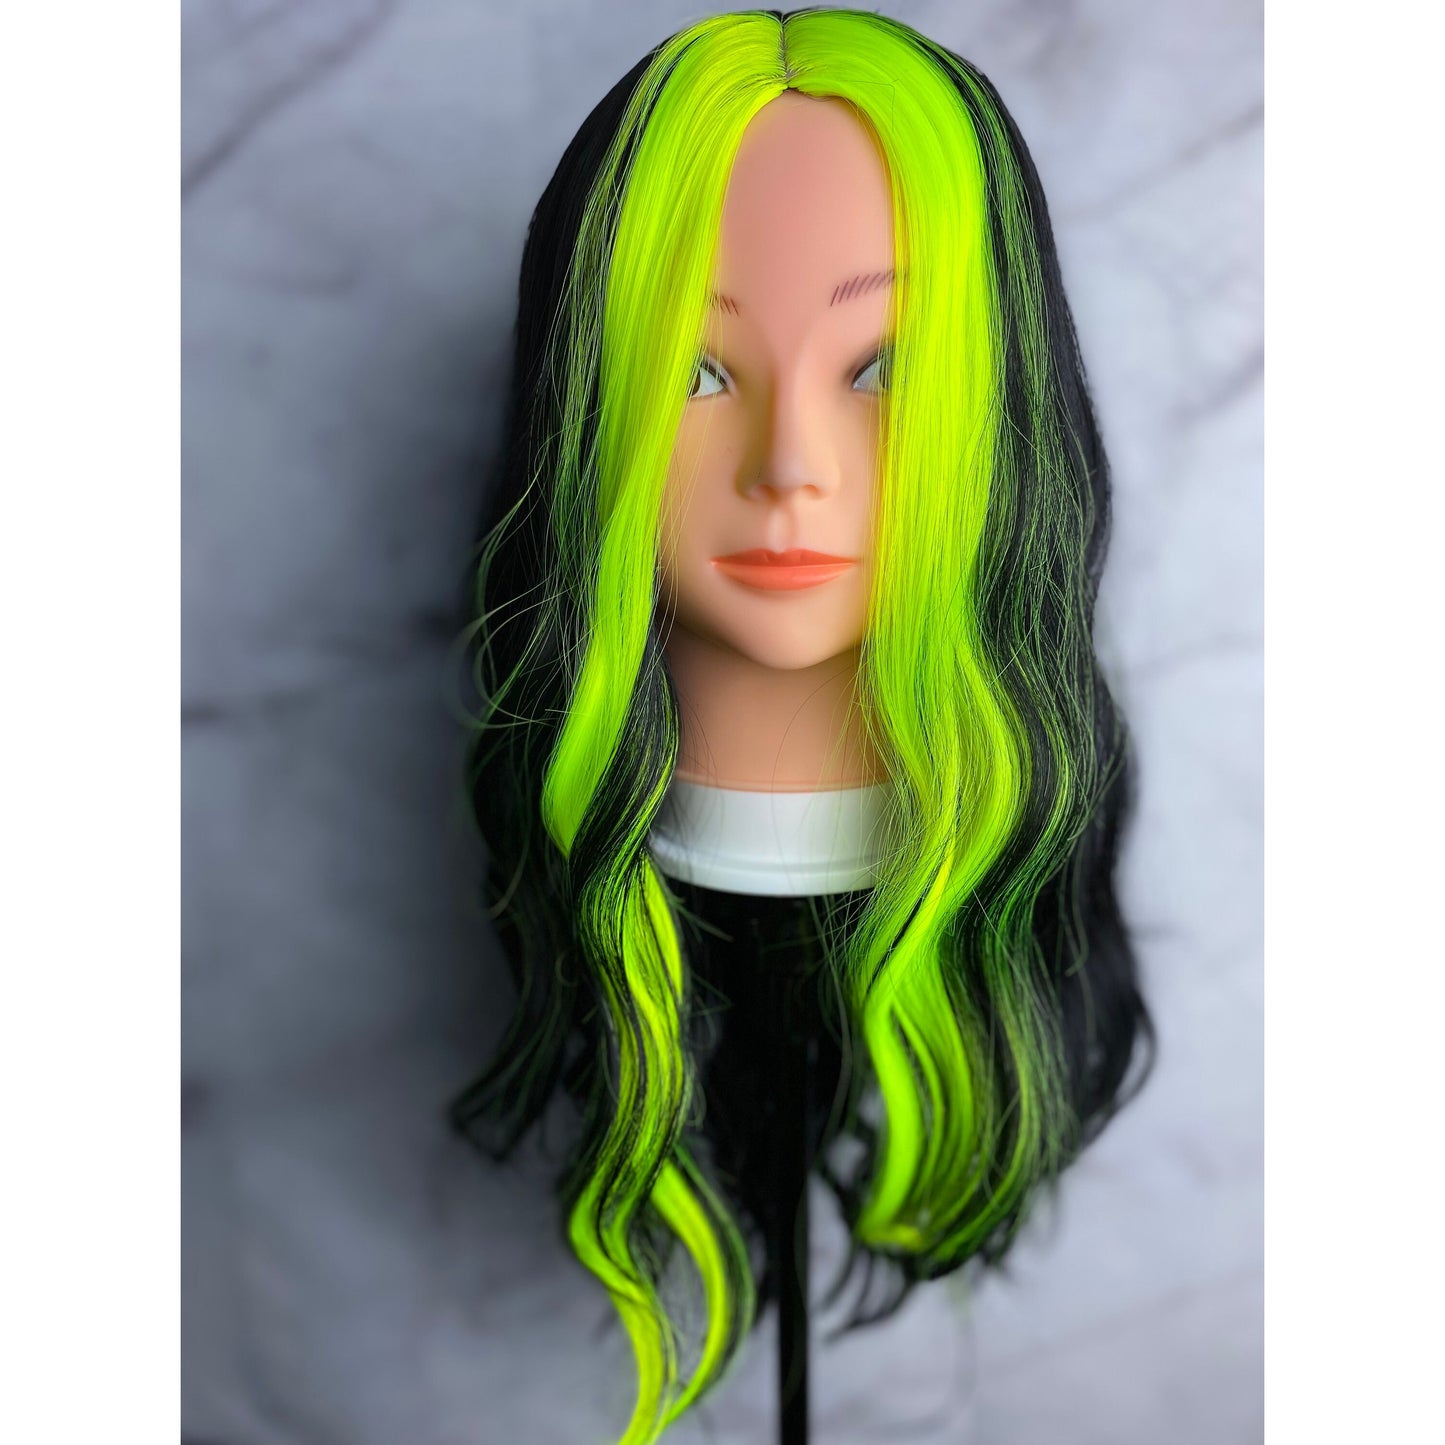 ,Billie Eilish Green Wigs,Black Wigs With Green Highligh,Short Bob Wigs,Wig for Patients